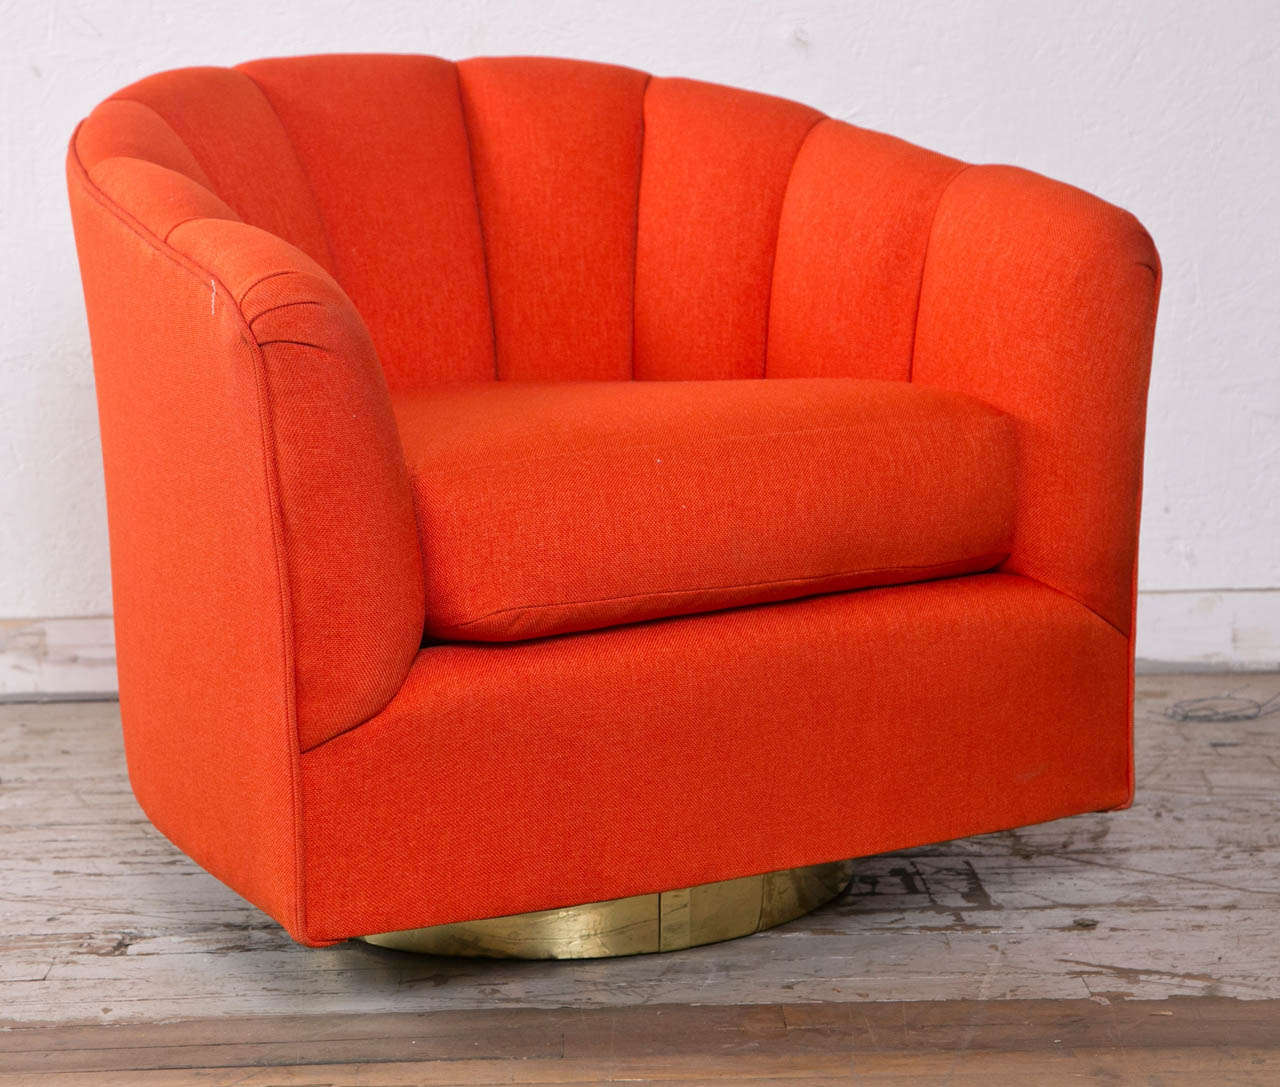 Mid Century swivel chairs designed in the style of Milo Baughman-
Completely restored in orange  cotton  fabric